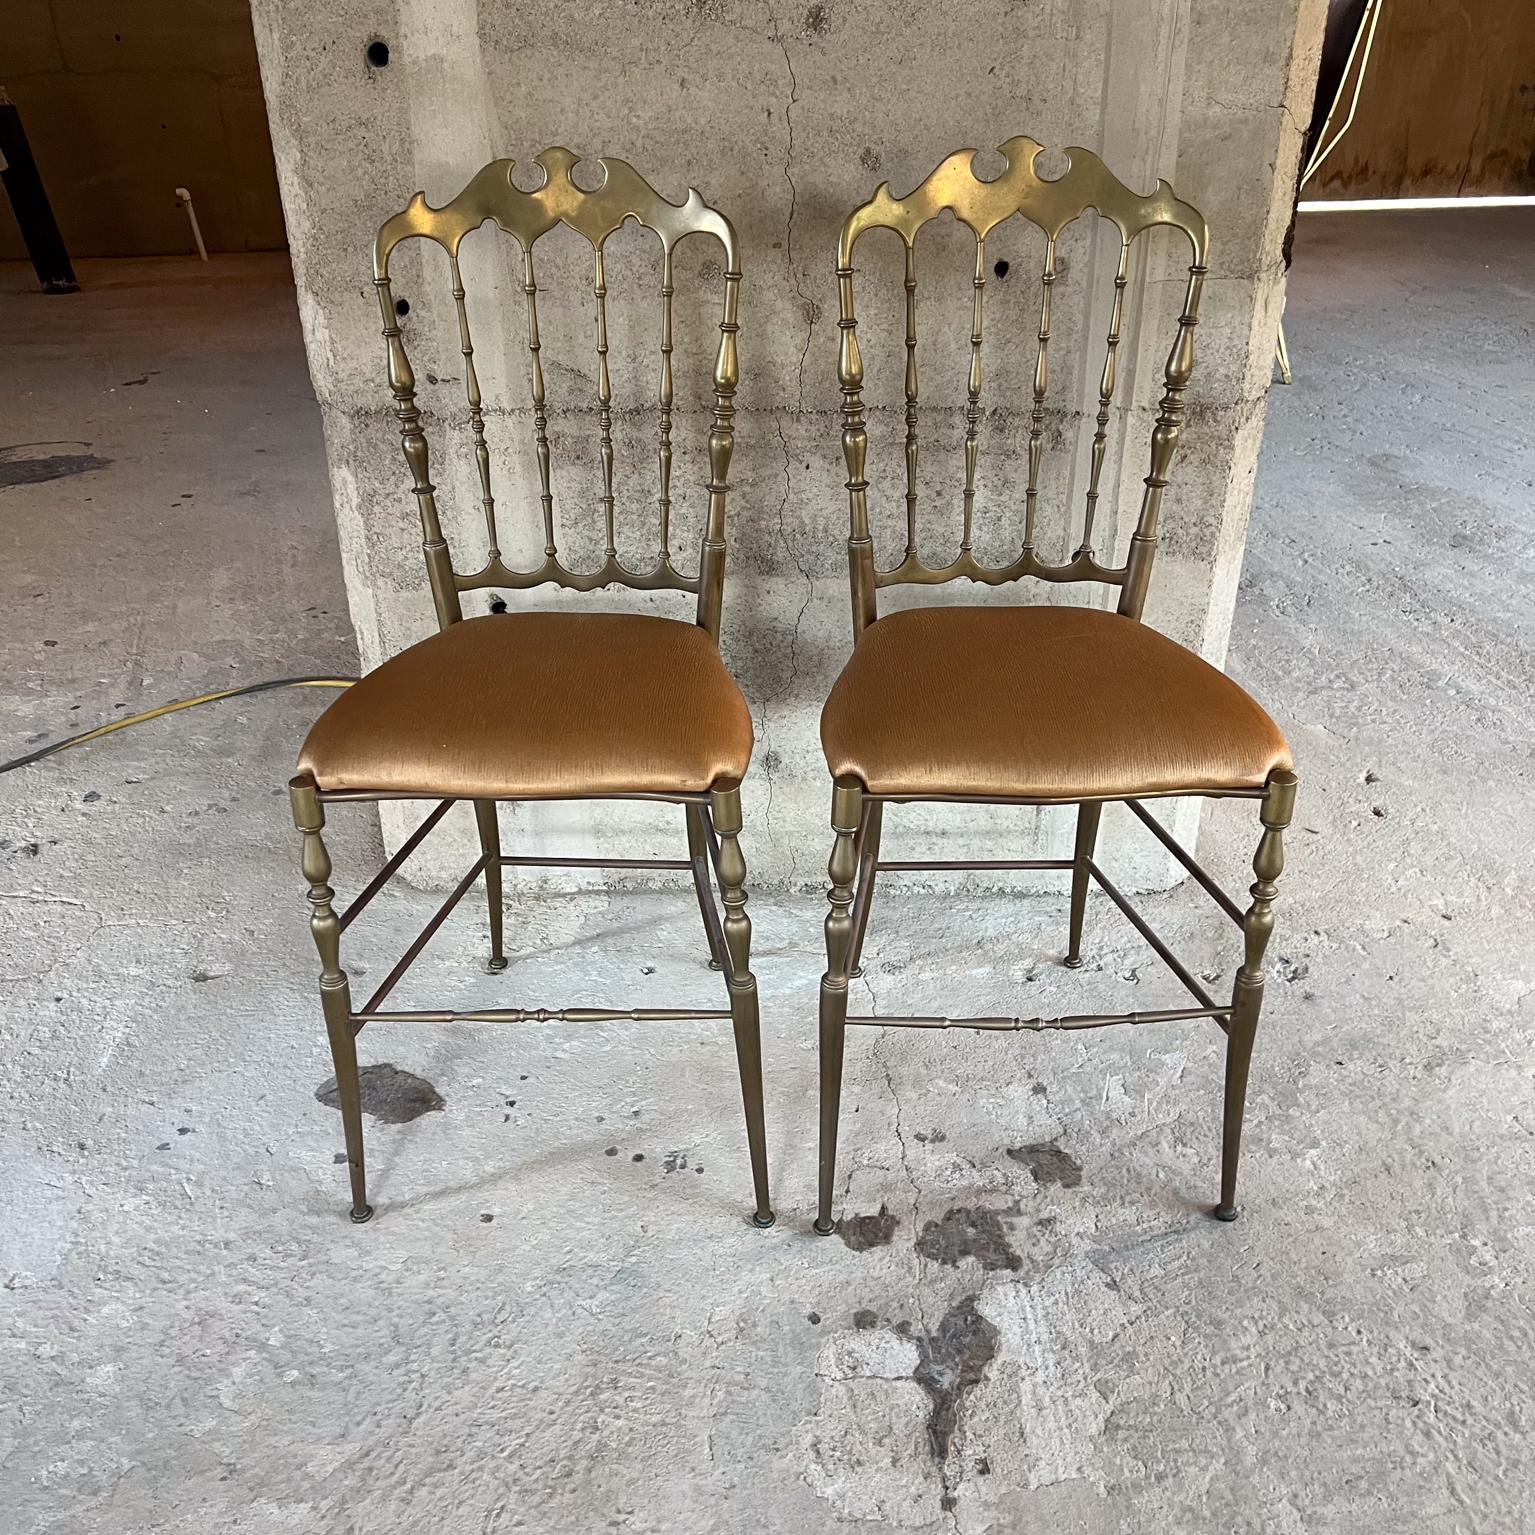 AMBIANIC presents
1950s Pair of Chiavari Side Chairs in Brass Italy
35.25 h x 15.25 w x 16.75 d seat 19
Original preowned vintage condition.
New upholstery.
Please review images provided.